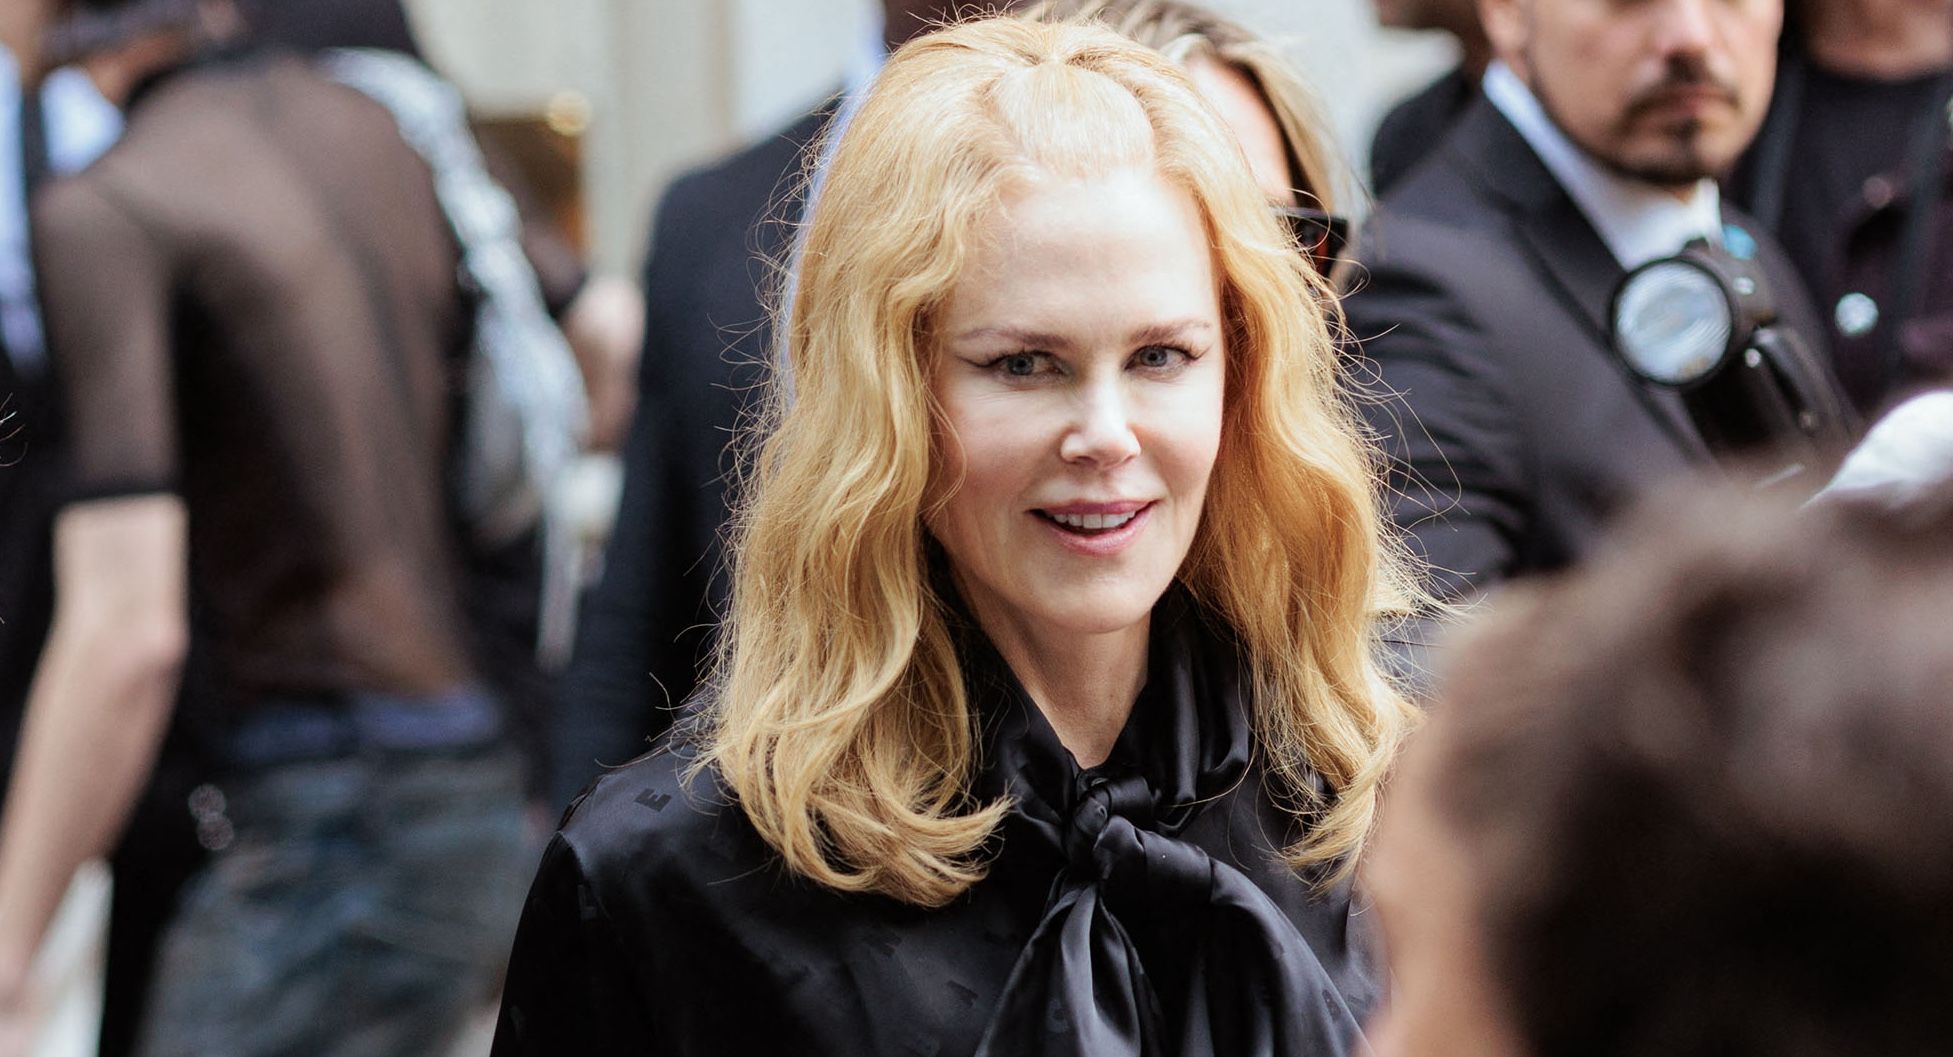 Nicole Kidman Admitted To Getting Botox After Denying The Rumors